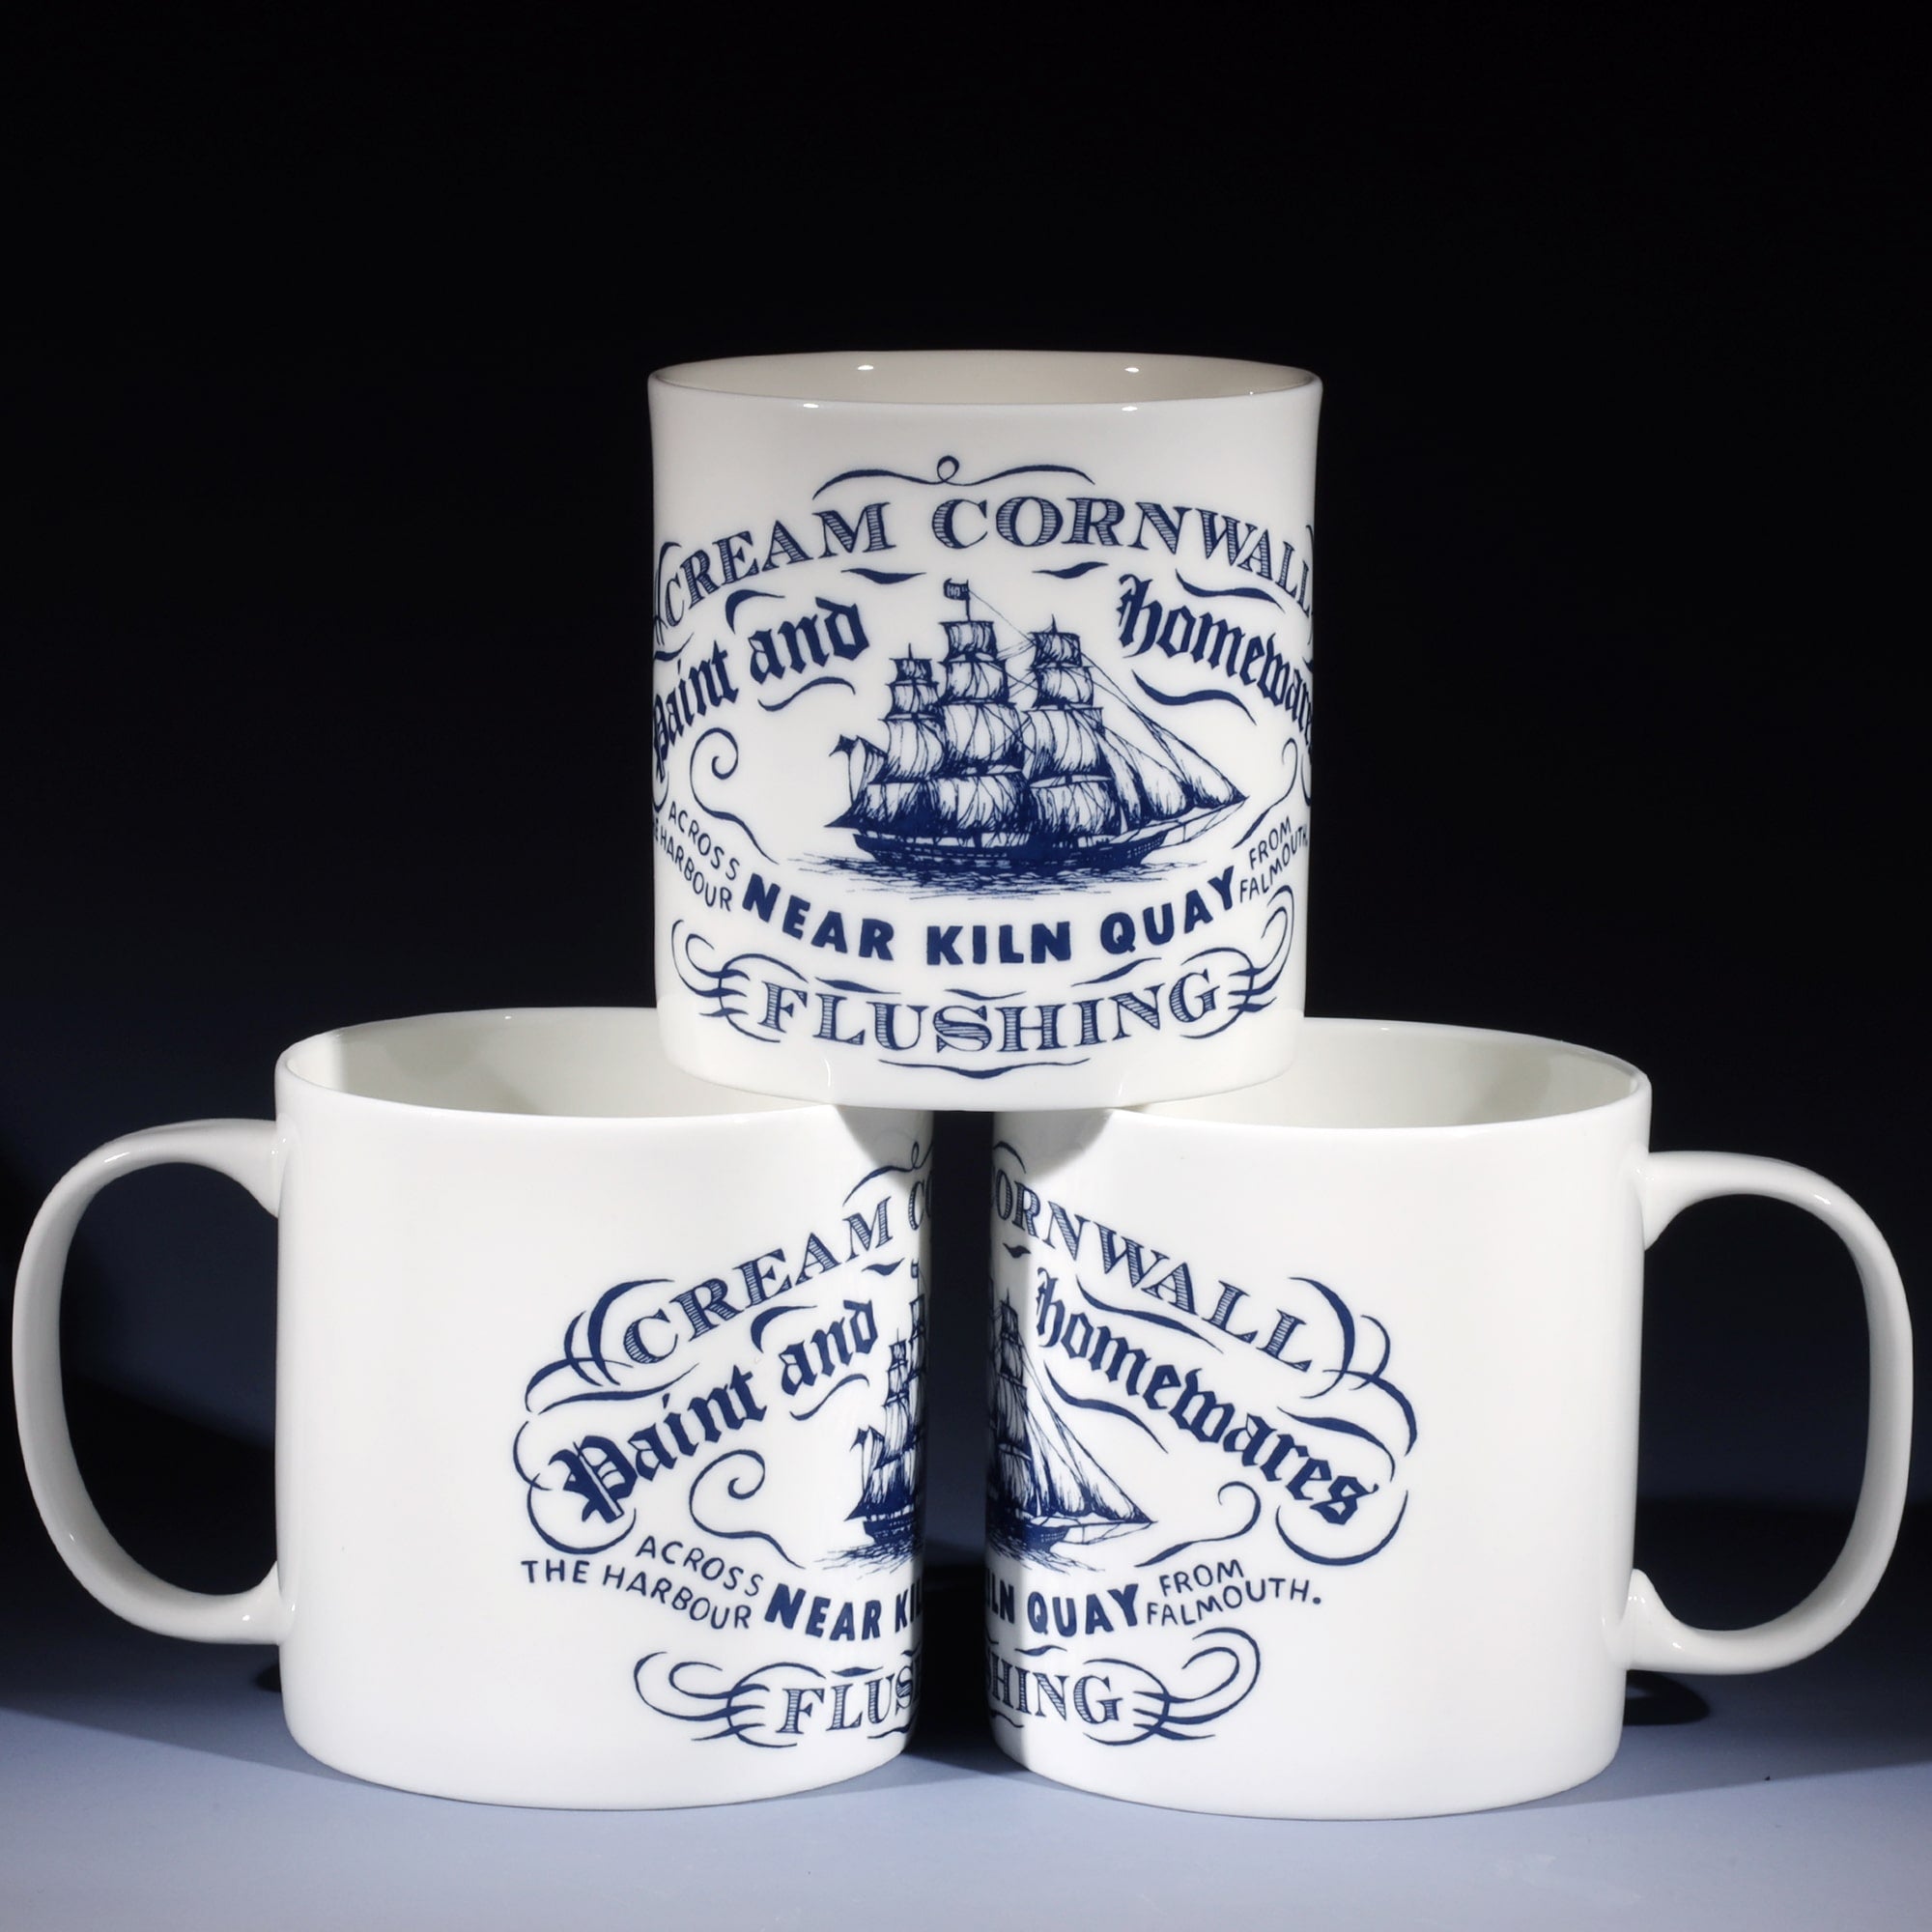 3 extra large 1 pint white bone china mugs. 2 at the bottom and one on top so that all the different sides of the design are shown. The design in navy blue is inspired by vintage maritime illustrations of ships maritime documentation with the place name Kiln Quay at the bottom.